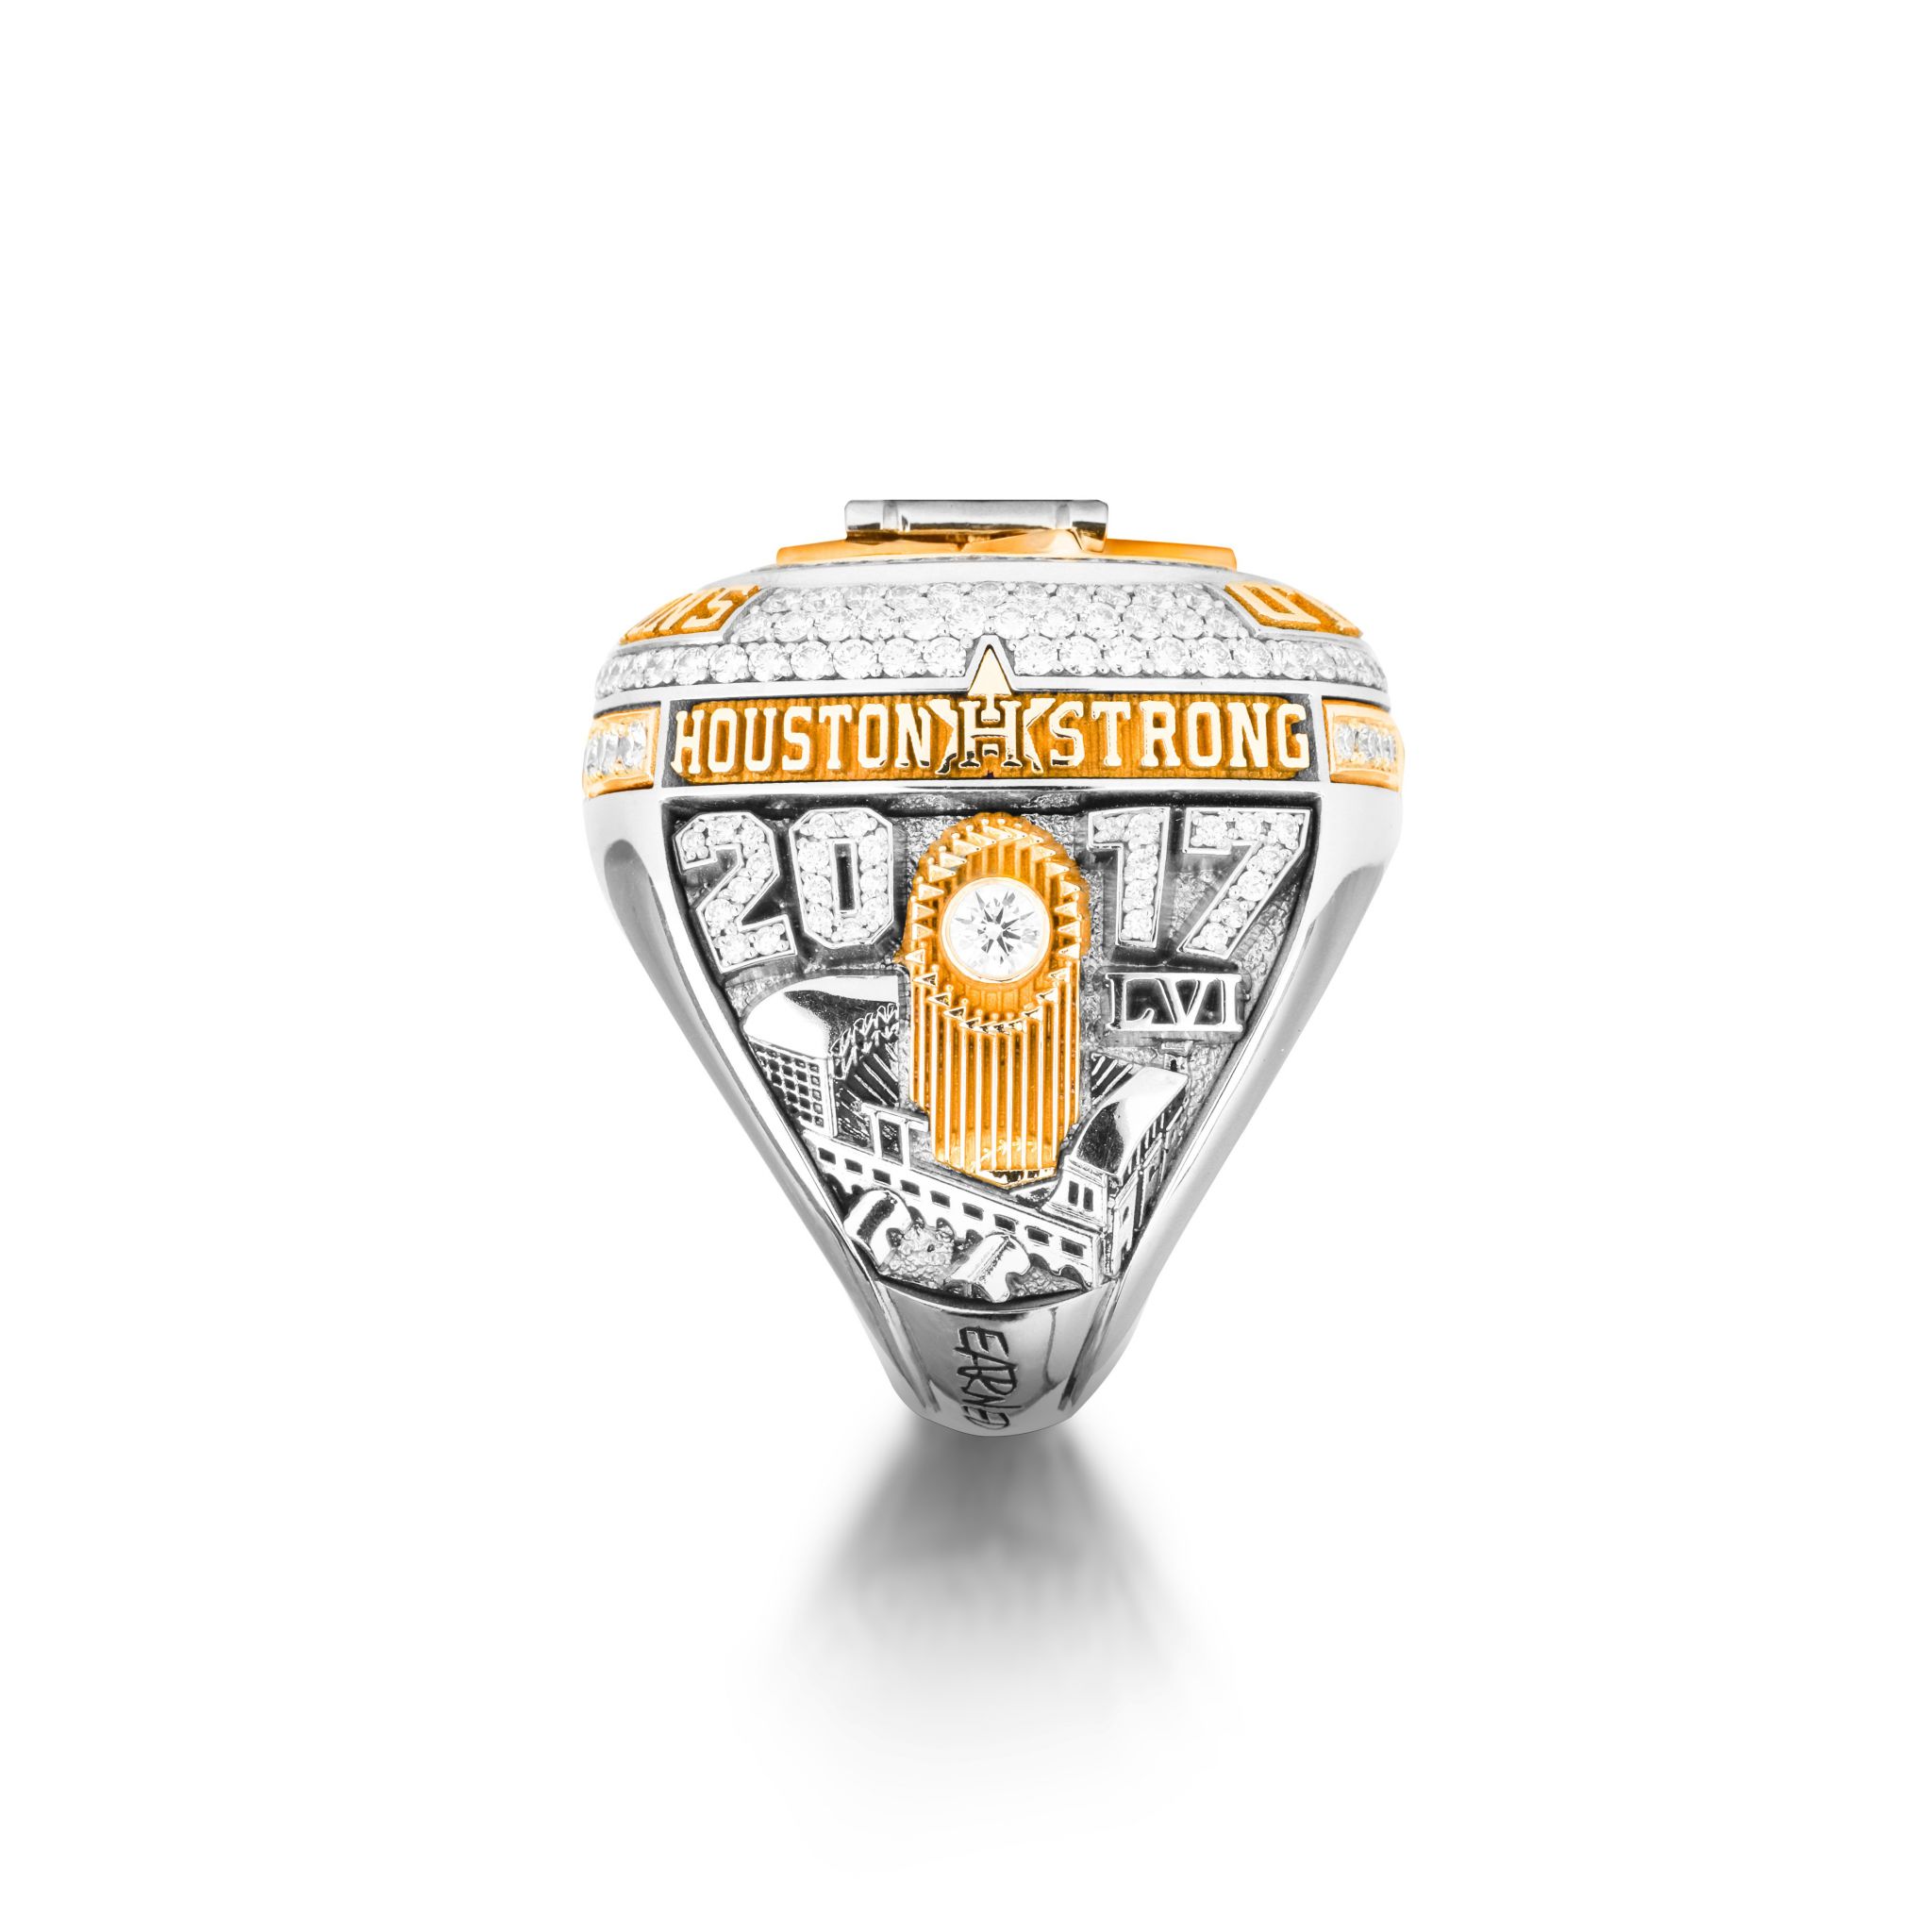 How Astros' World Series replica rings became hottest ticket in town